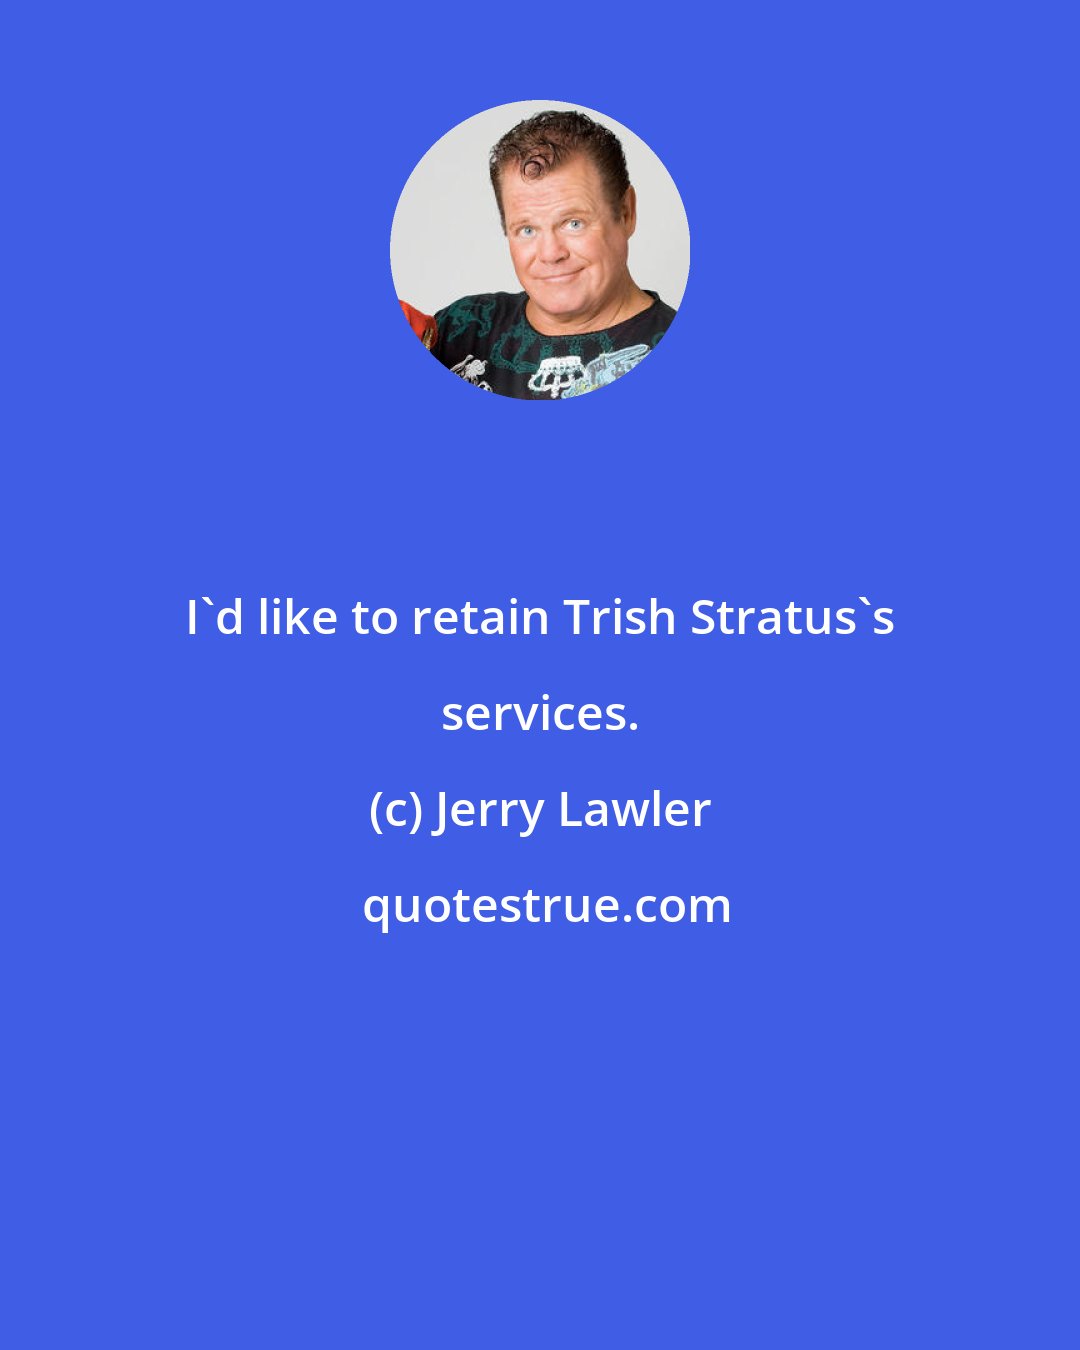 Jerry Lawler: I'd like to retain Trish Stratus's services.